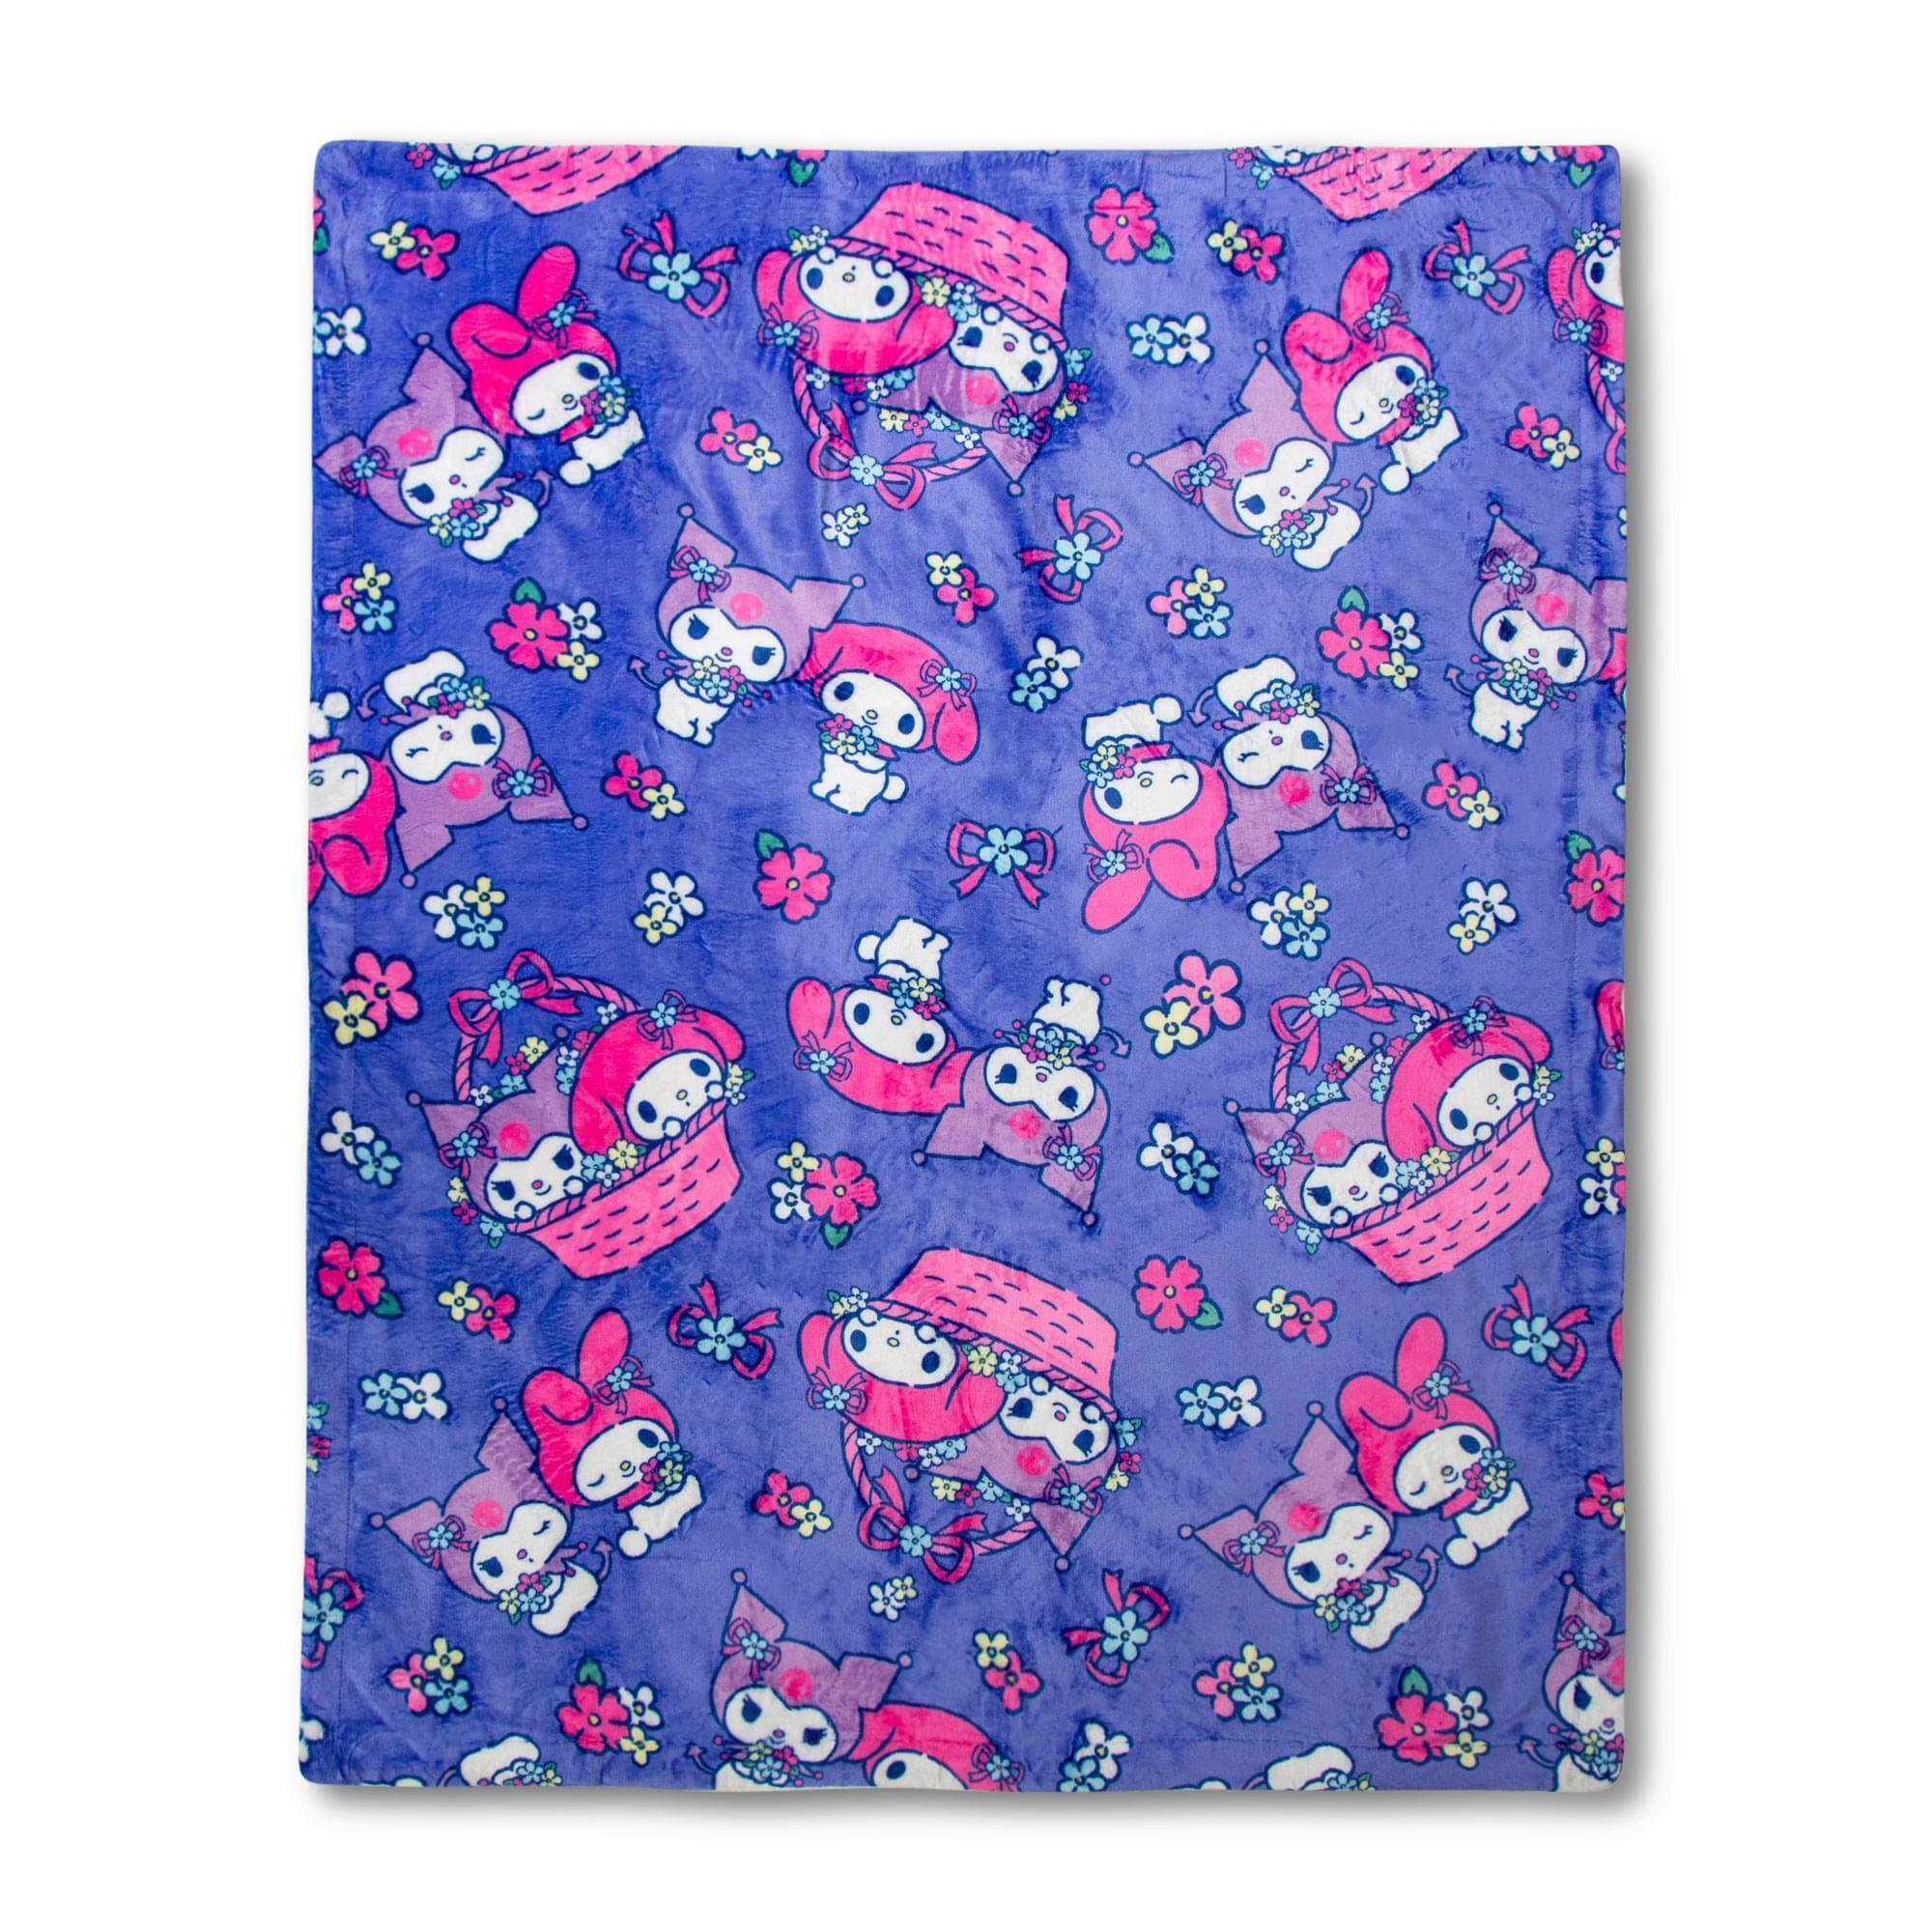 Sanrio My Melody and Kuromi Flower Baskets Sherpa Throw Blanket | 50 x 60 Inches